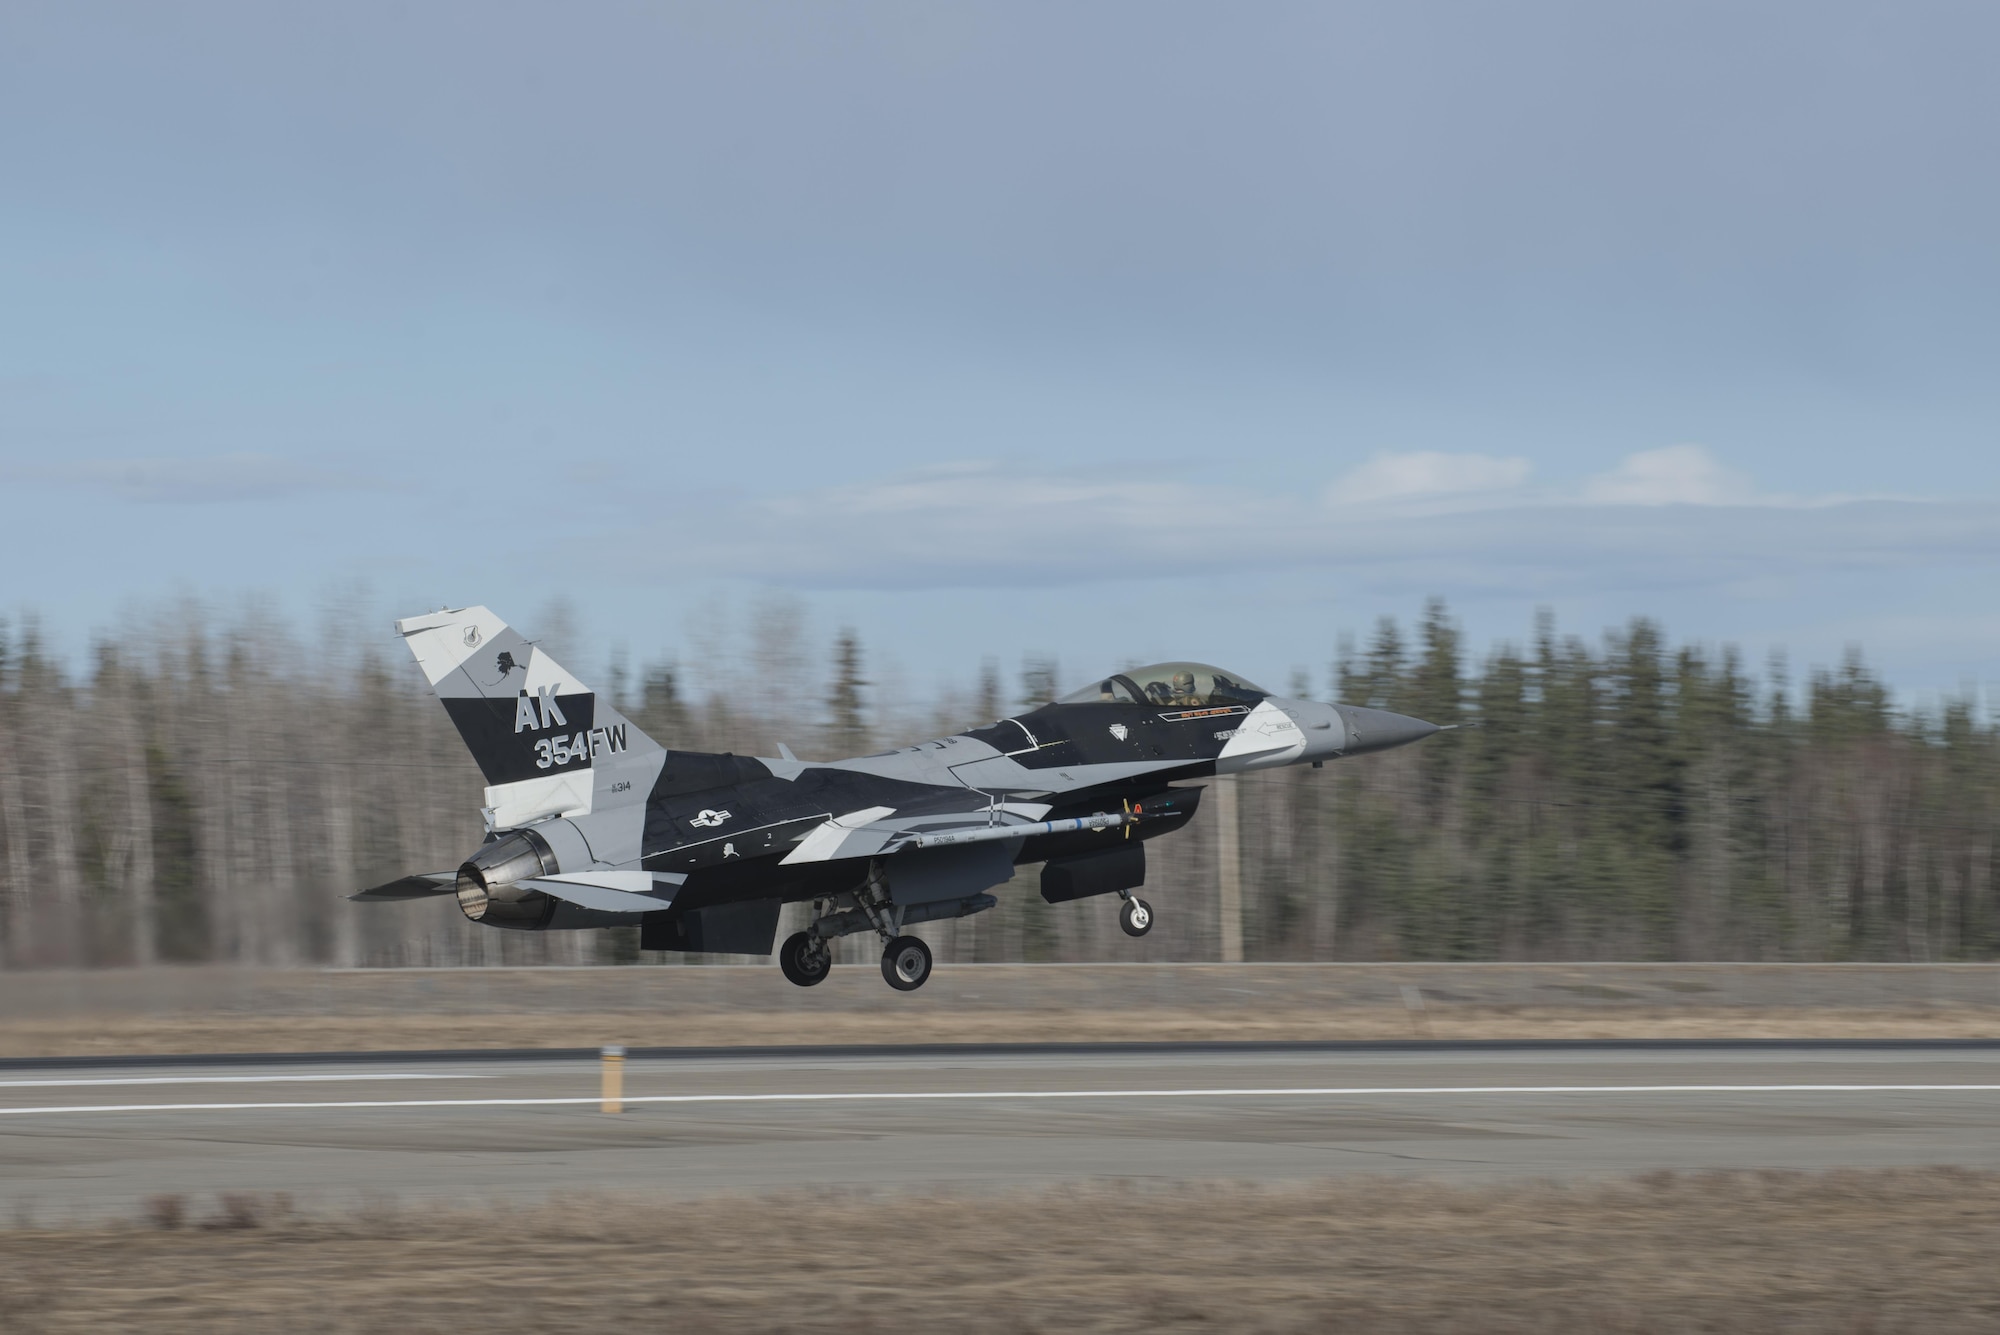 EIELSON AIR FORCE BASE, Alaska – A U.S. Air Force F-16 Fighting Falcon aircraft assigned to the 18th Aggressor Squadron takes off for a sortie from Eielson Air Force Base, Alaska, May 1, 2017 during NORTHERN EDGE 2017 (NE17). NE17 is Alaska’s premier joint training exercise designed to practice operations, techniques and procedures as well as enhance interoperability among the services. Thousands of participants from all the services, Airmen, Soldiers, Sailors, Marines and Coast Guardsmen from active duty, Reserve and National Guard units are involved. (U.S. Air Force photo/Staff Sgt. Ashley Nicole Taylor)